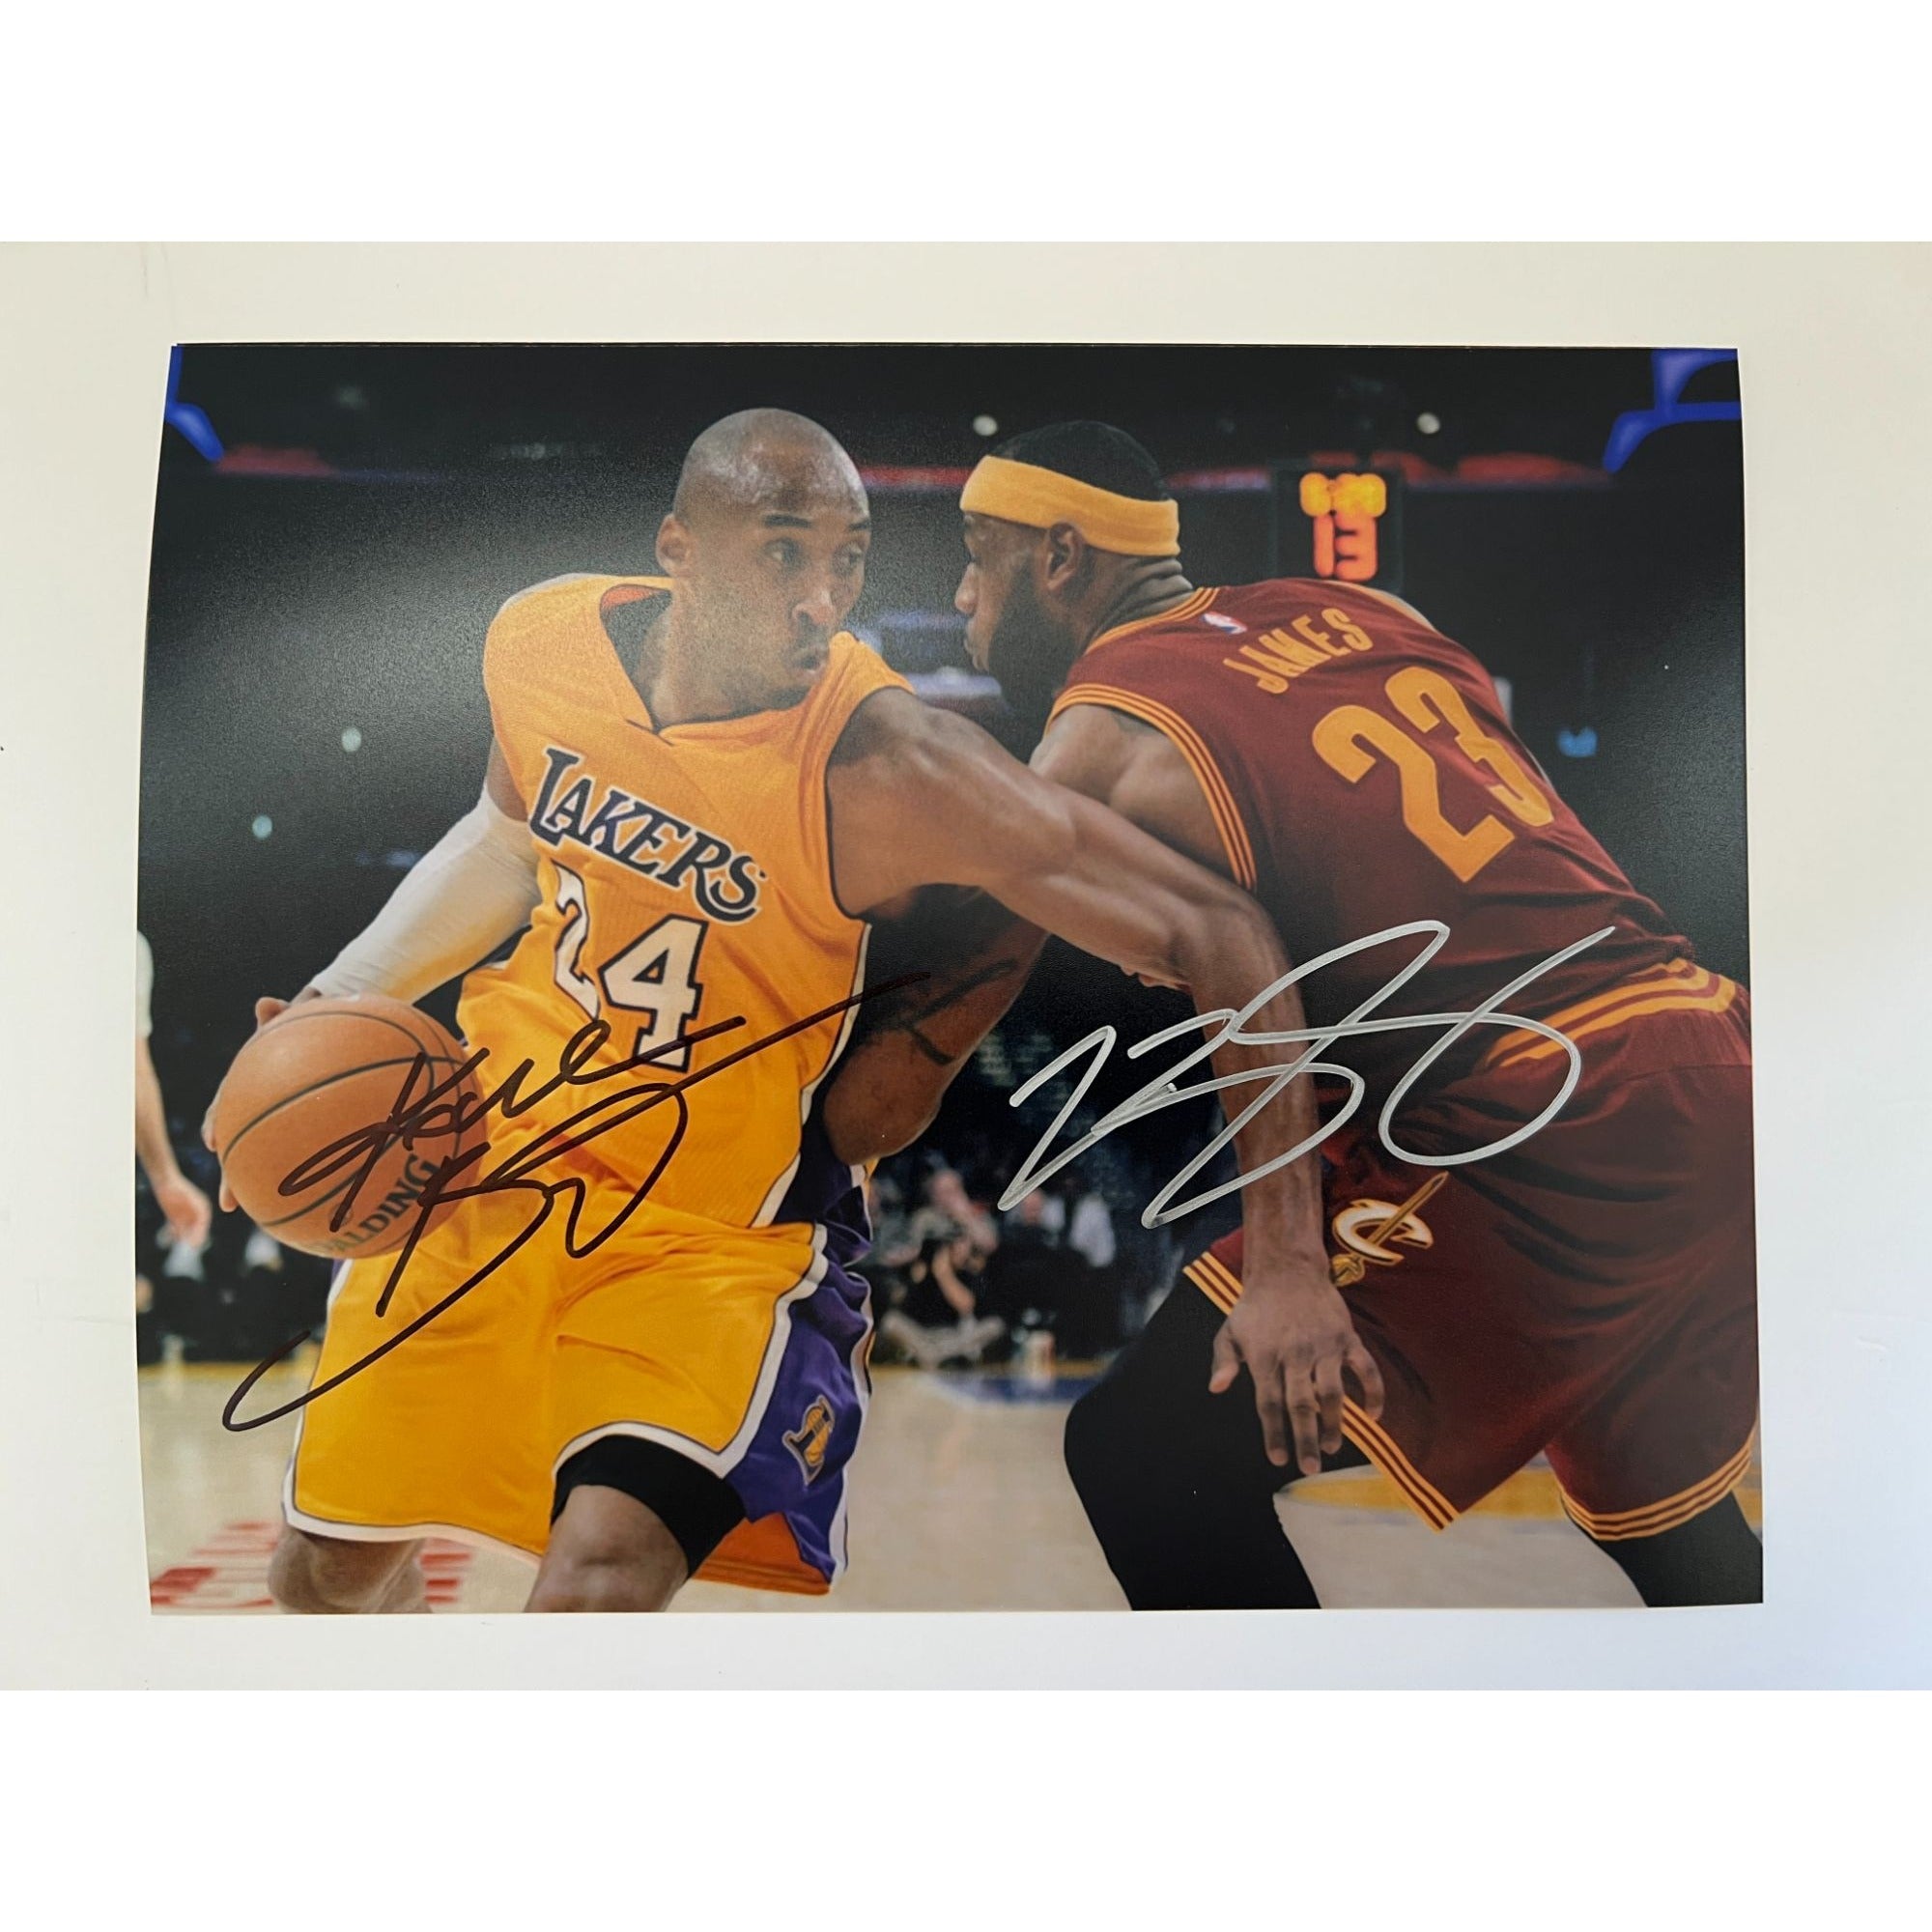 Lebron James and Kobe Bryant 8x10 photo signed with proof